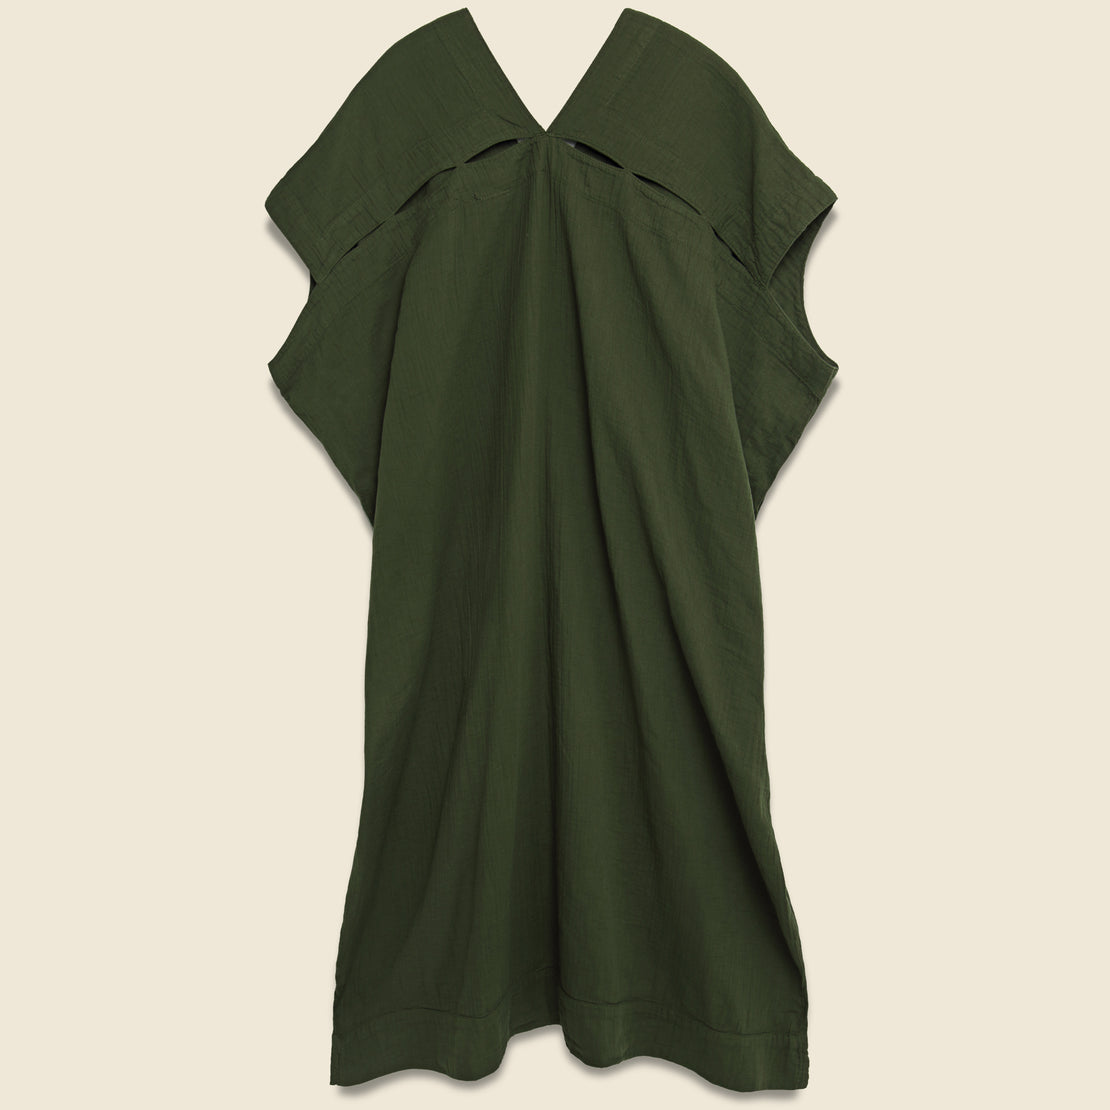 Crescent Dress - Hunter Green - Atelier Delphine - STAG Provisions - W - Onepiece - Dress